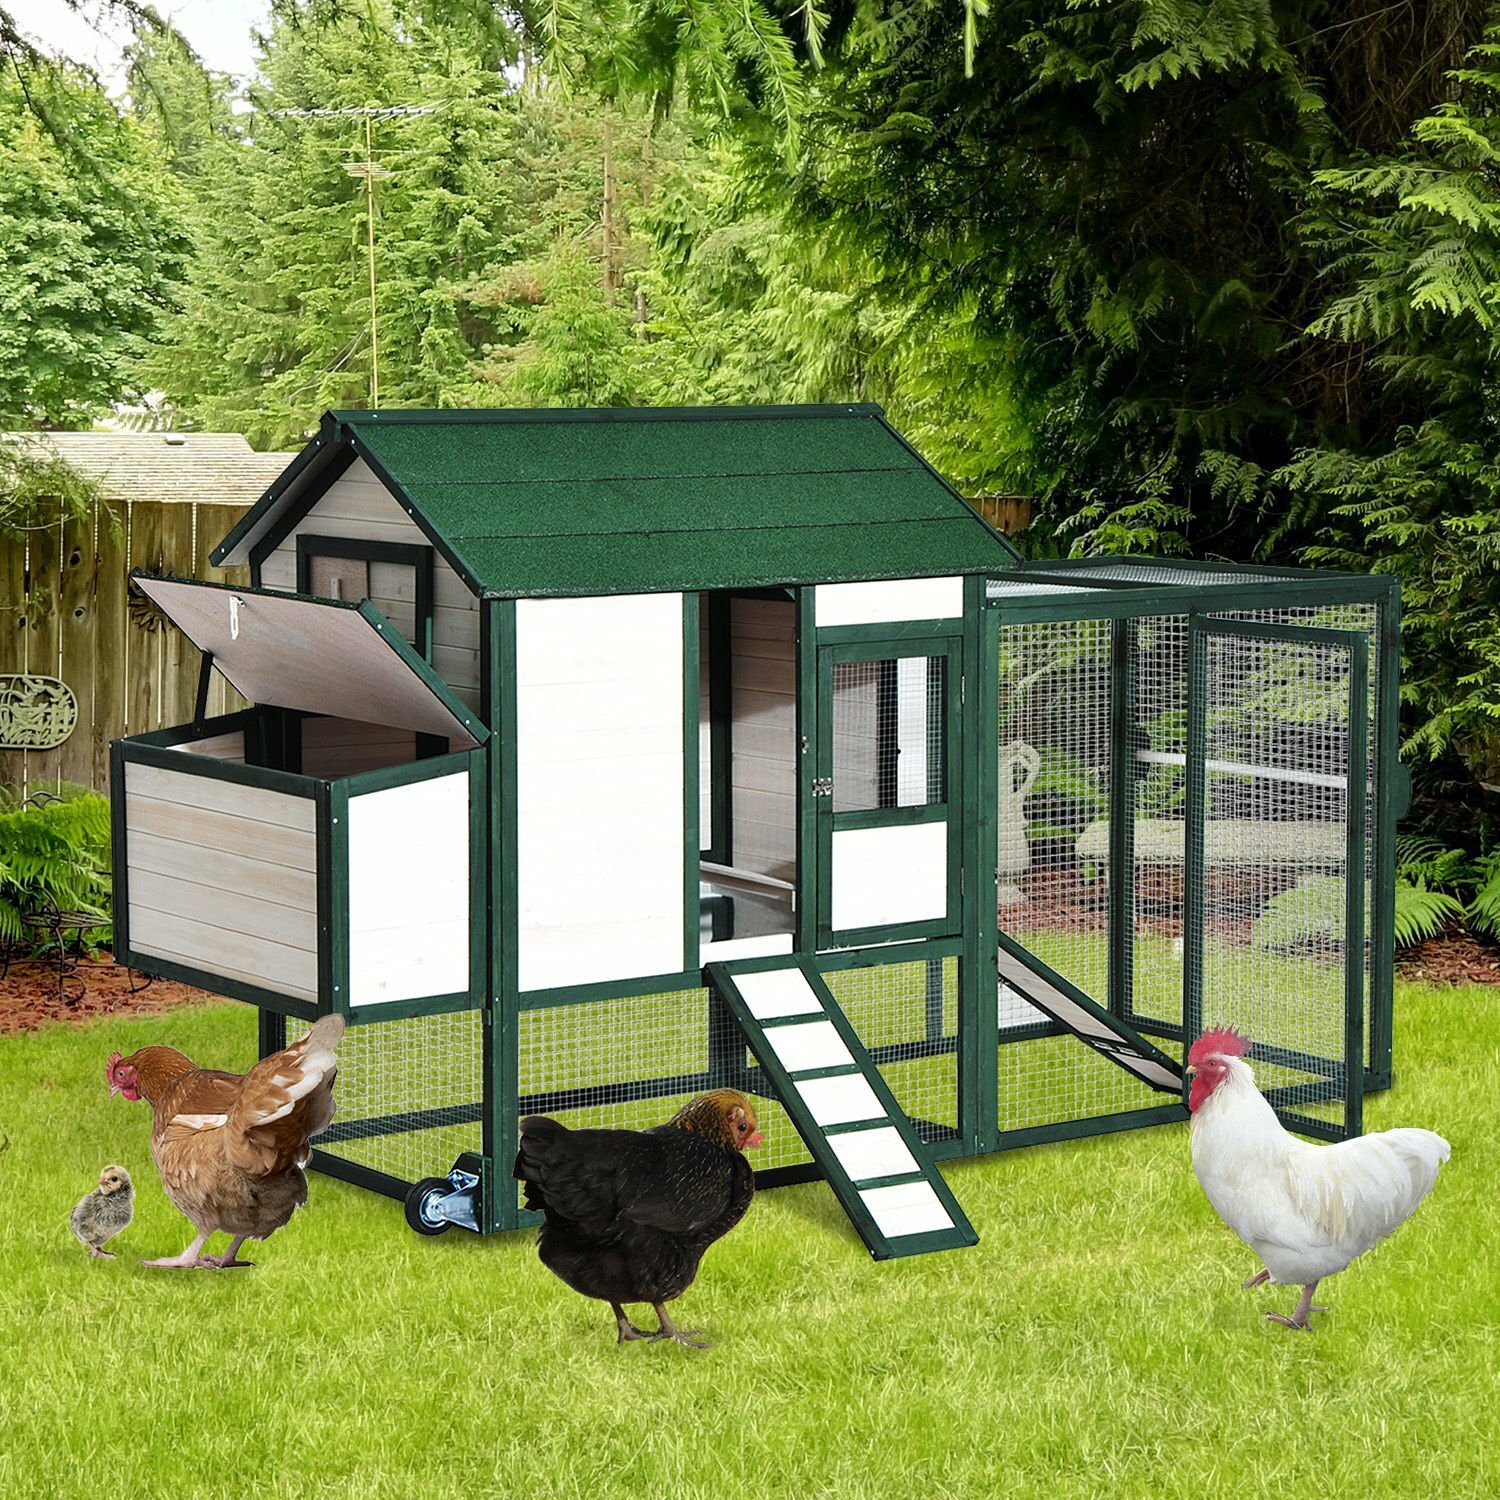 Garlington Portable Wooden Chicken Coop With Wheels Run And Nesting Box